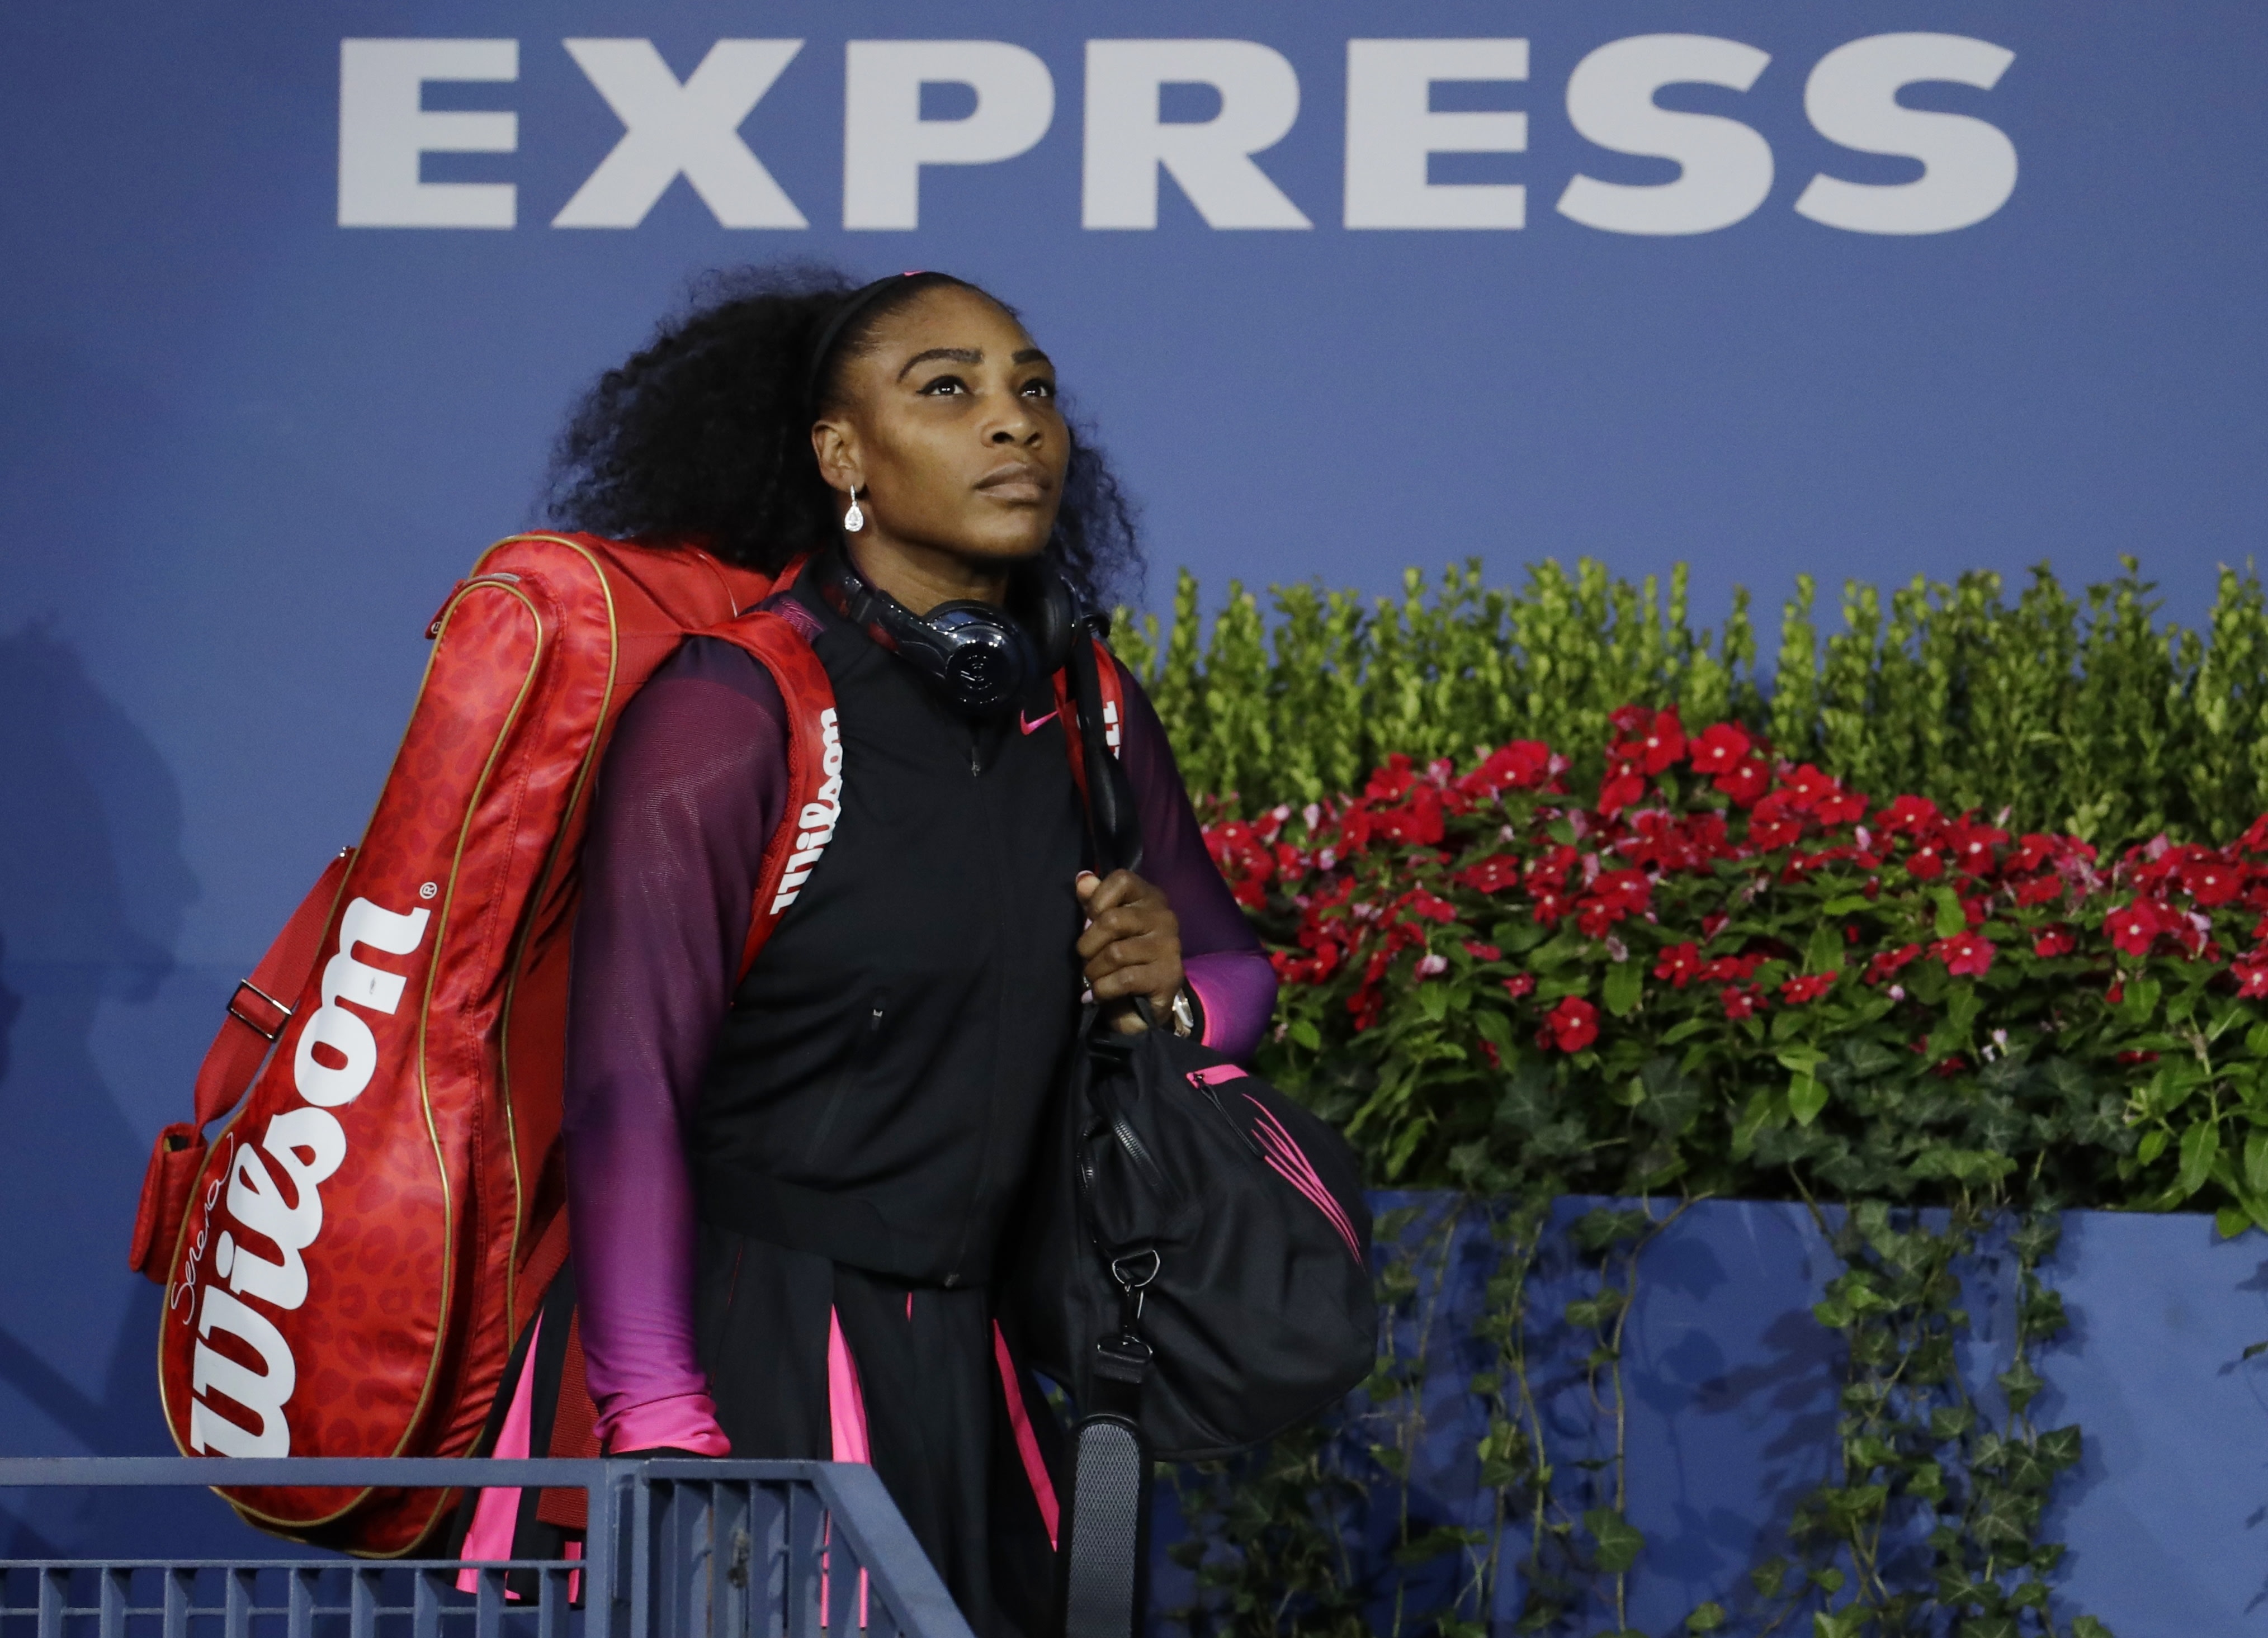 It Didn't Come Naturally to Me': Serena Williams Emphasizes the Efforts She  Put In to Become a Champion - EssentiallySports